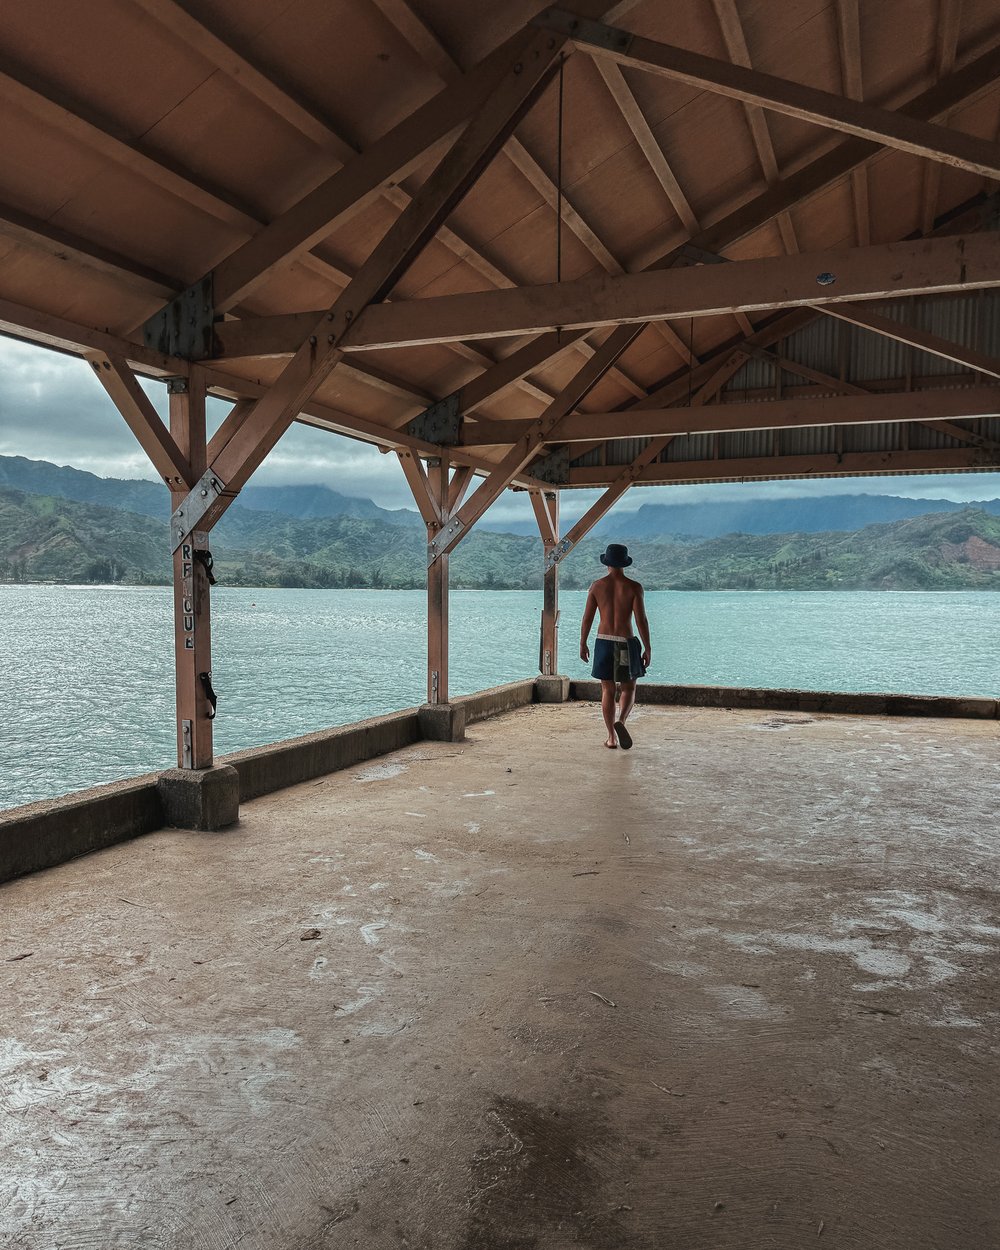   The Hanalei Pier , as featured in Jason Mraz’s and Collbie Caillat’s ‘Lucky’ music video!  